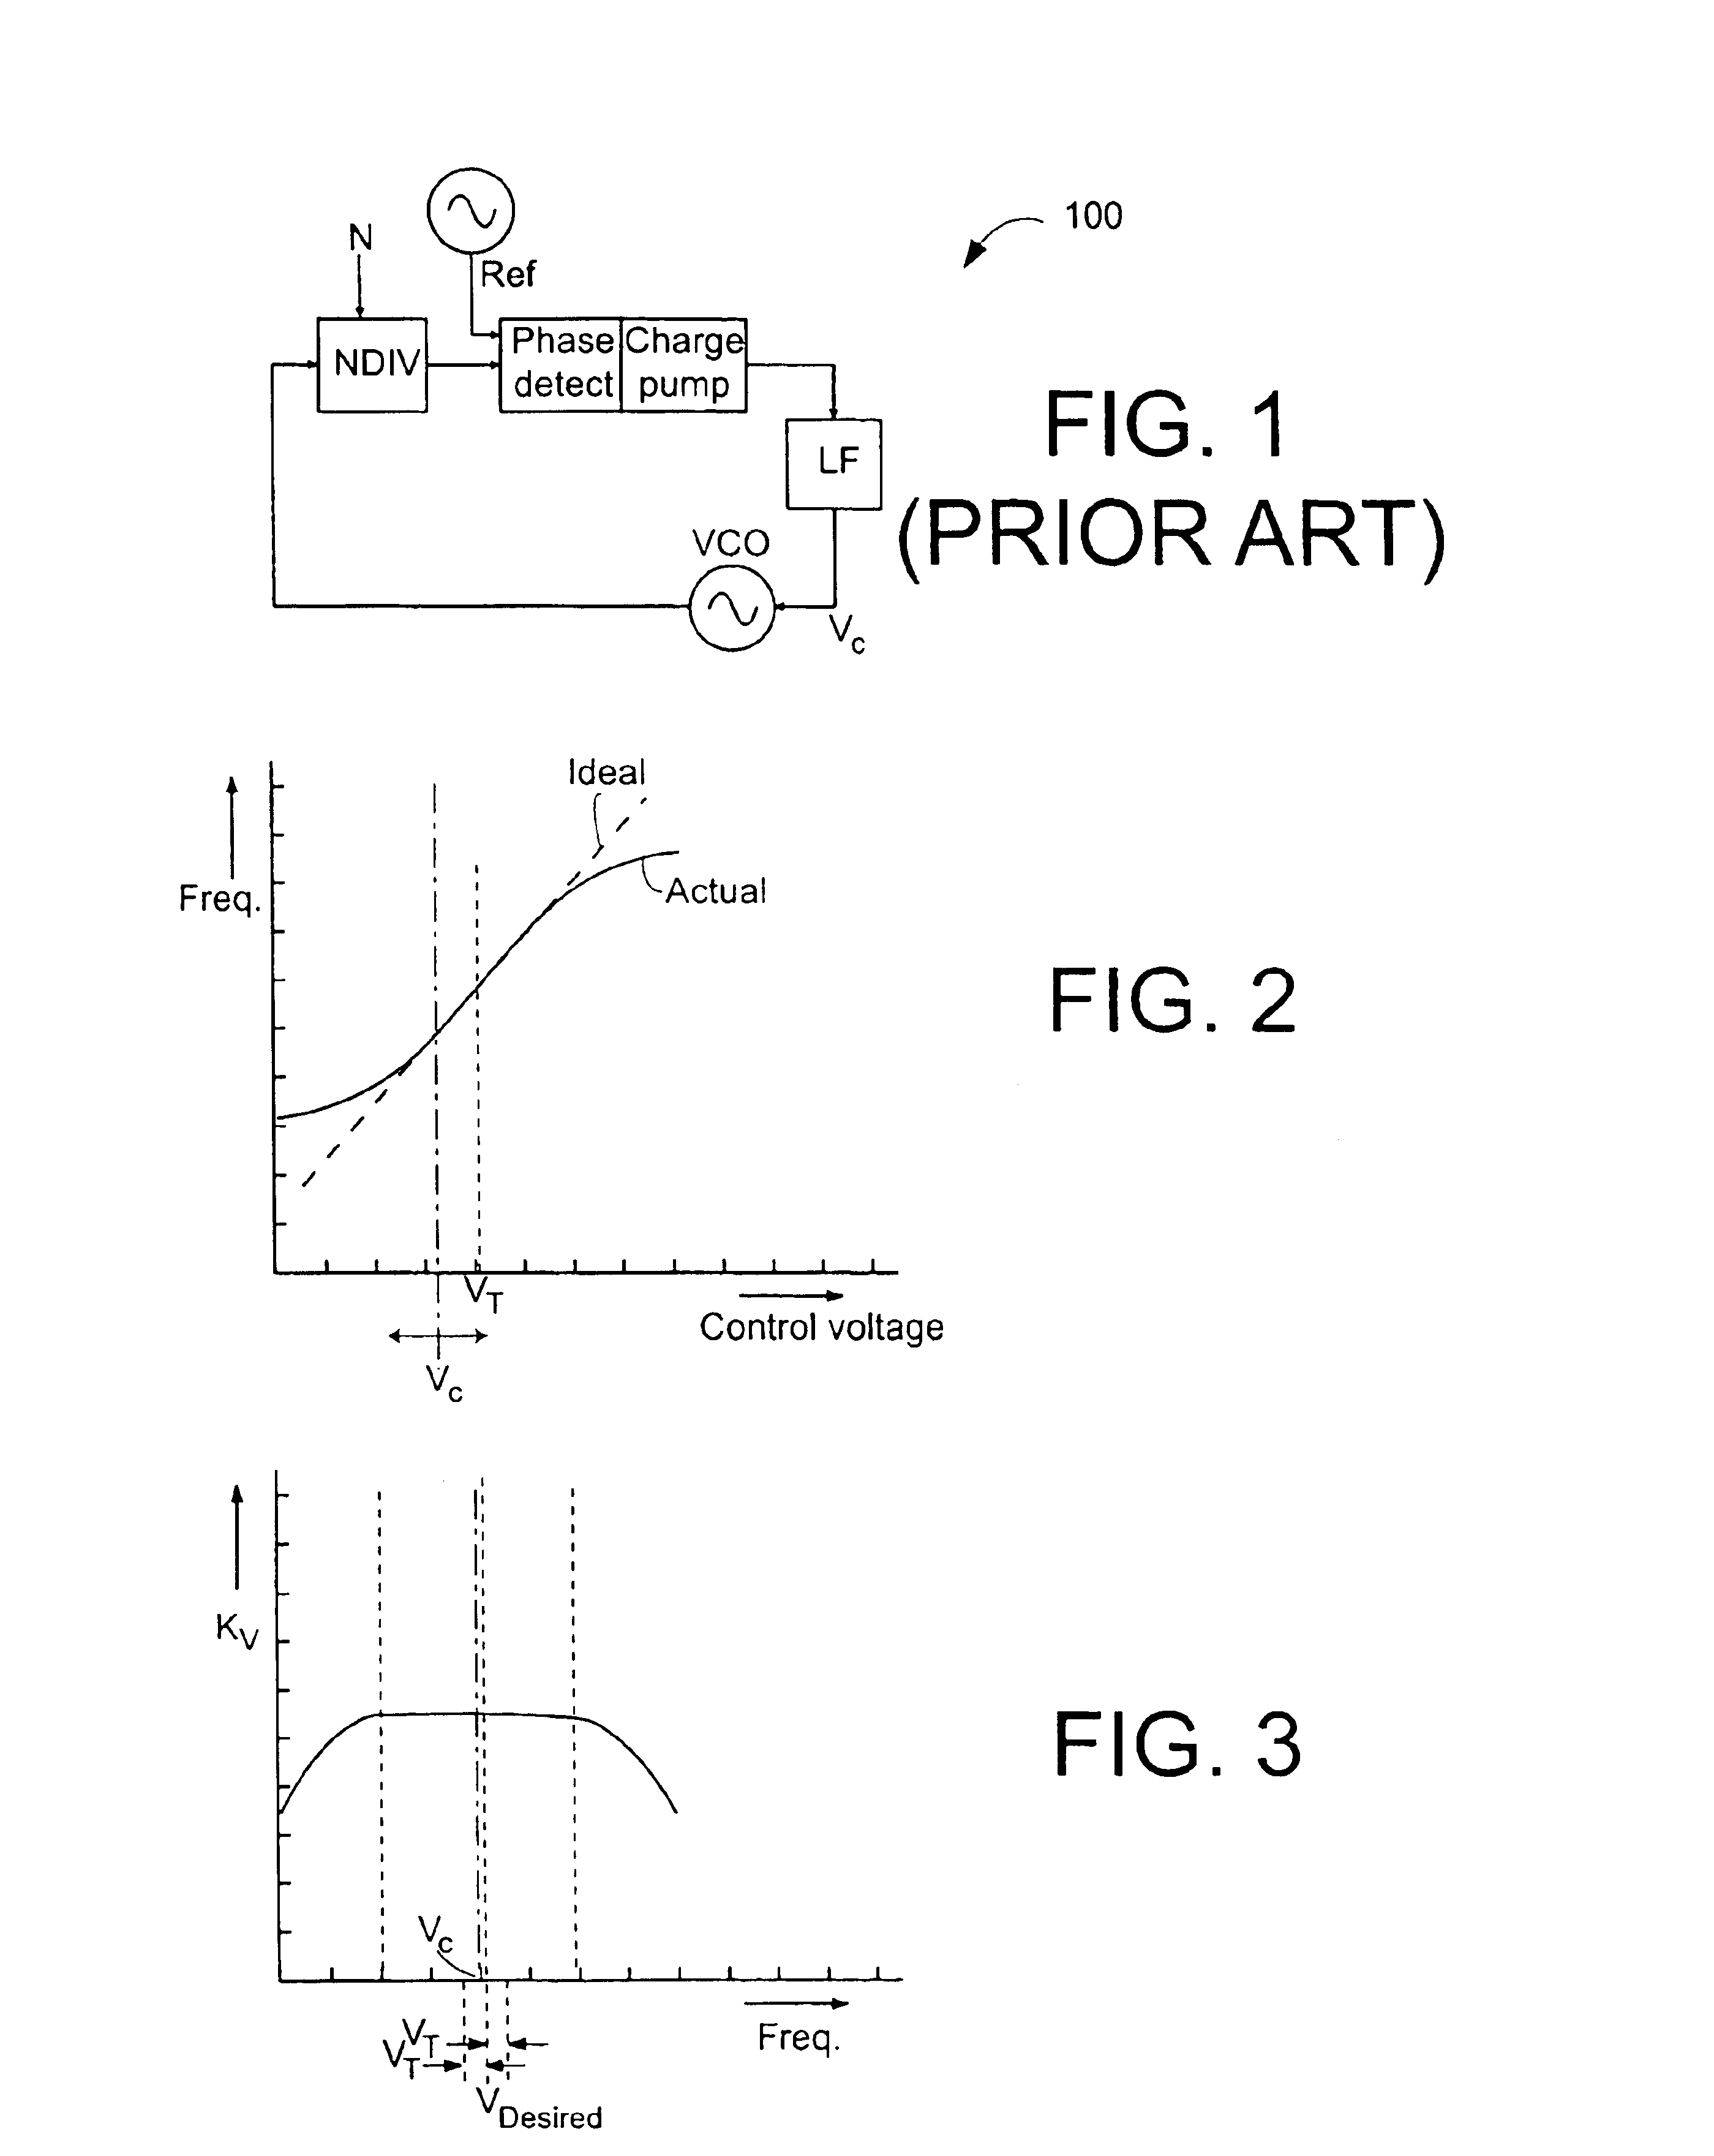 Frequency synthesizer using a VCO having a controllable operating point, and calibration and tuning thereof